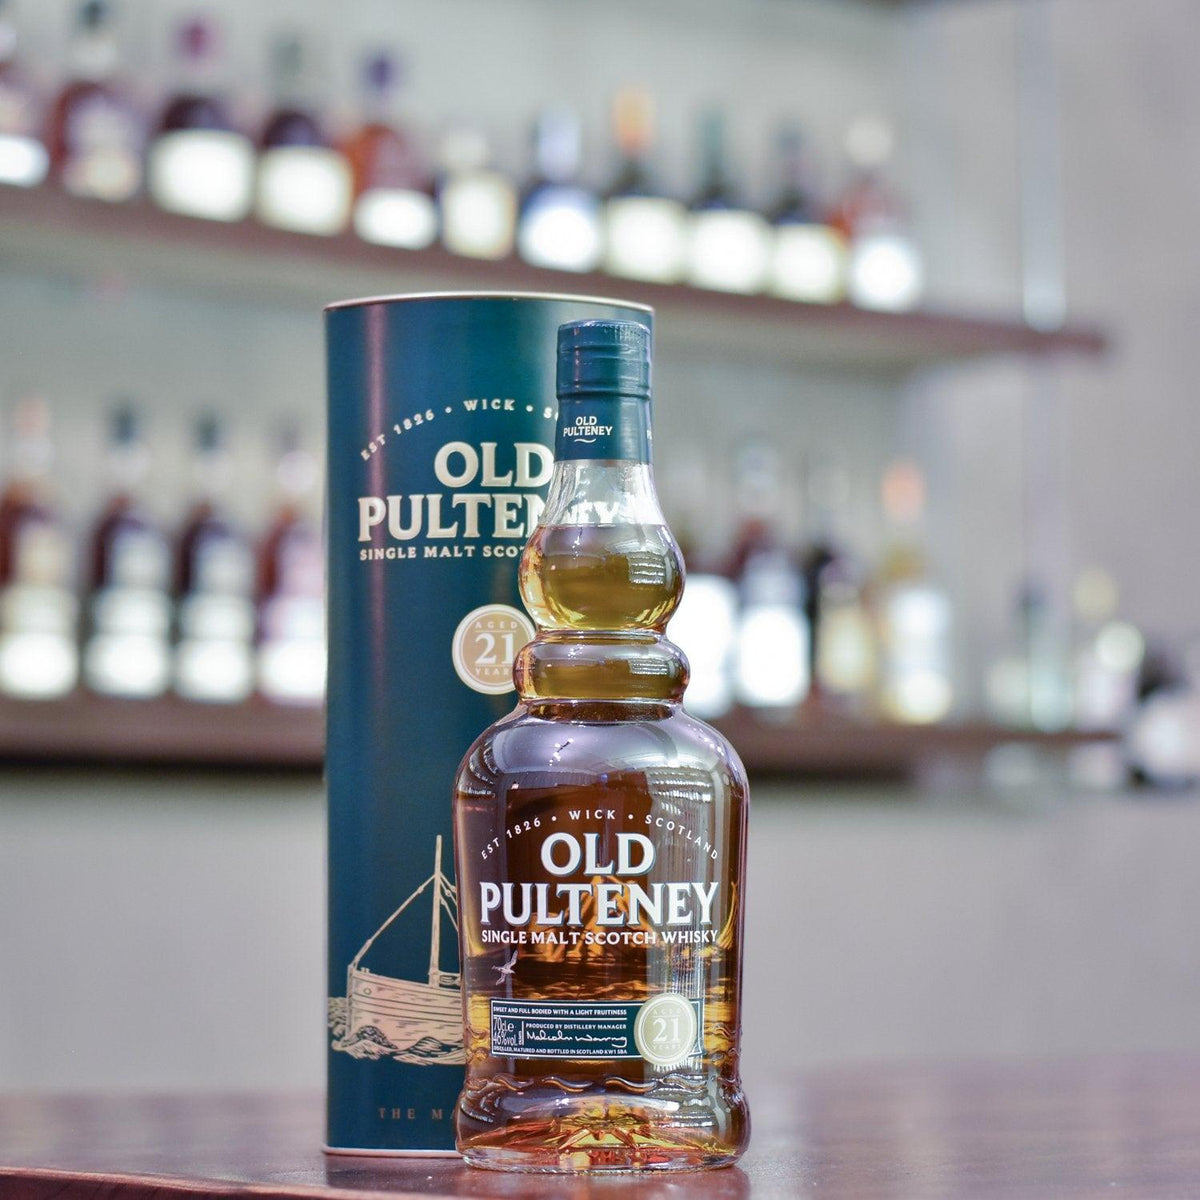 Old Pulteney 21 Year Old - The Rare Malt